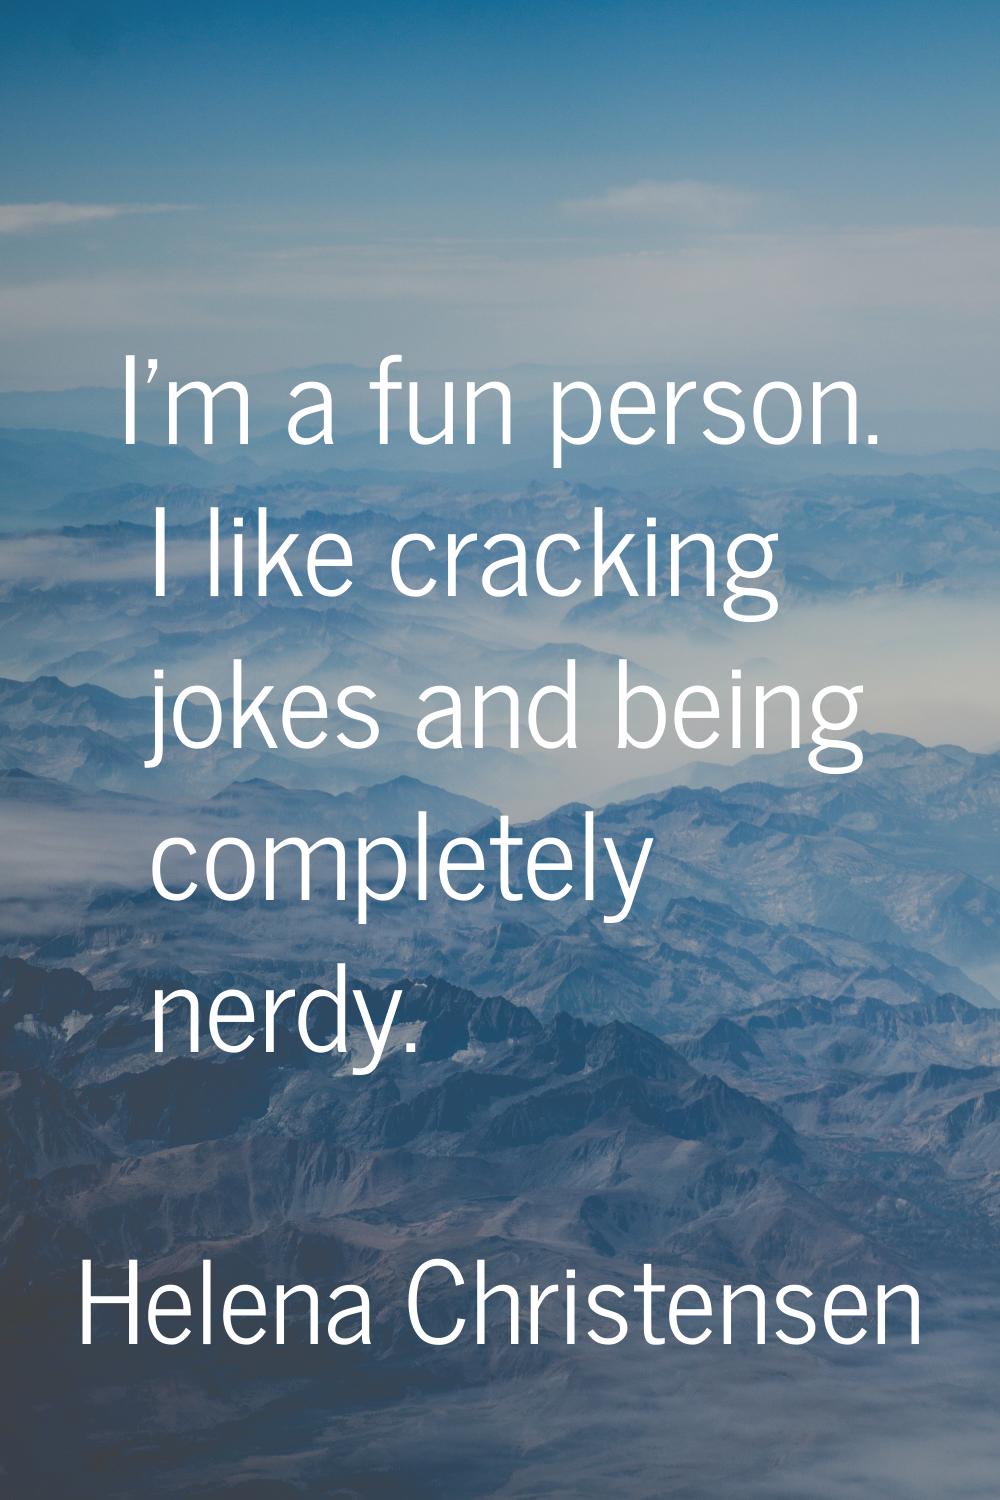 I'm a fun person. I like cracking jokes and being completely nerdy.